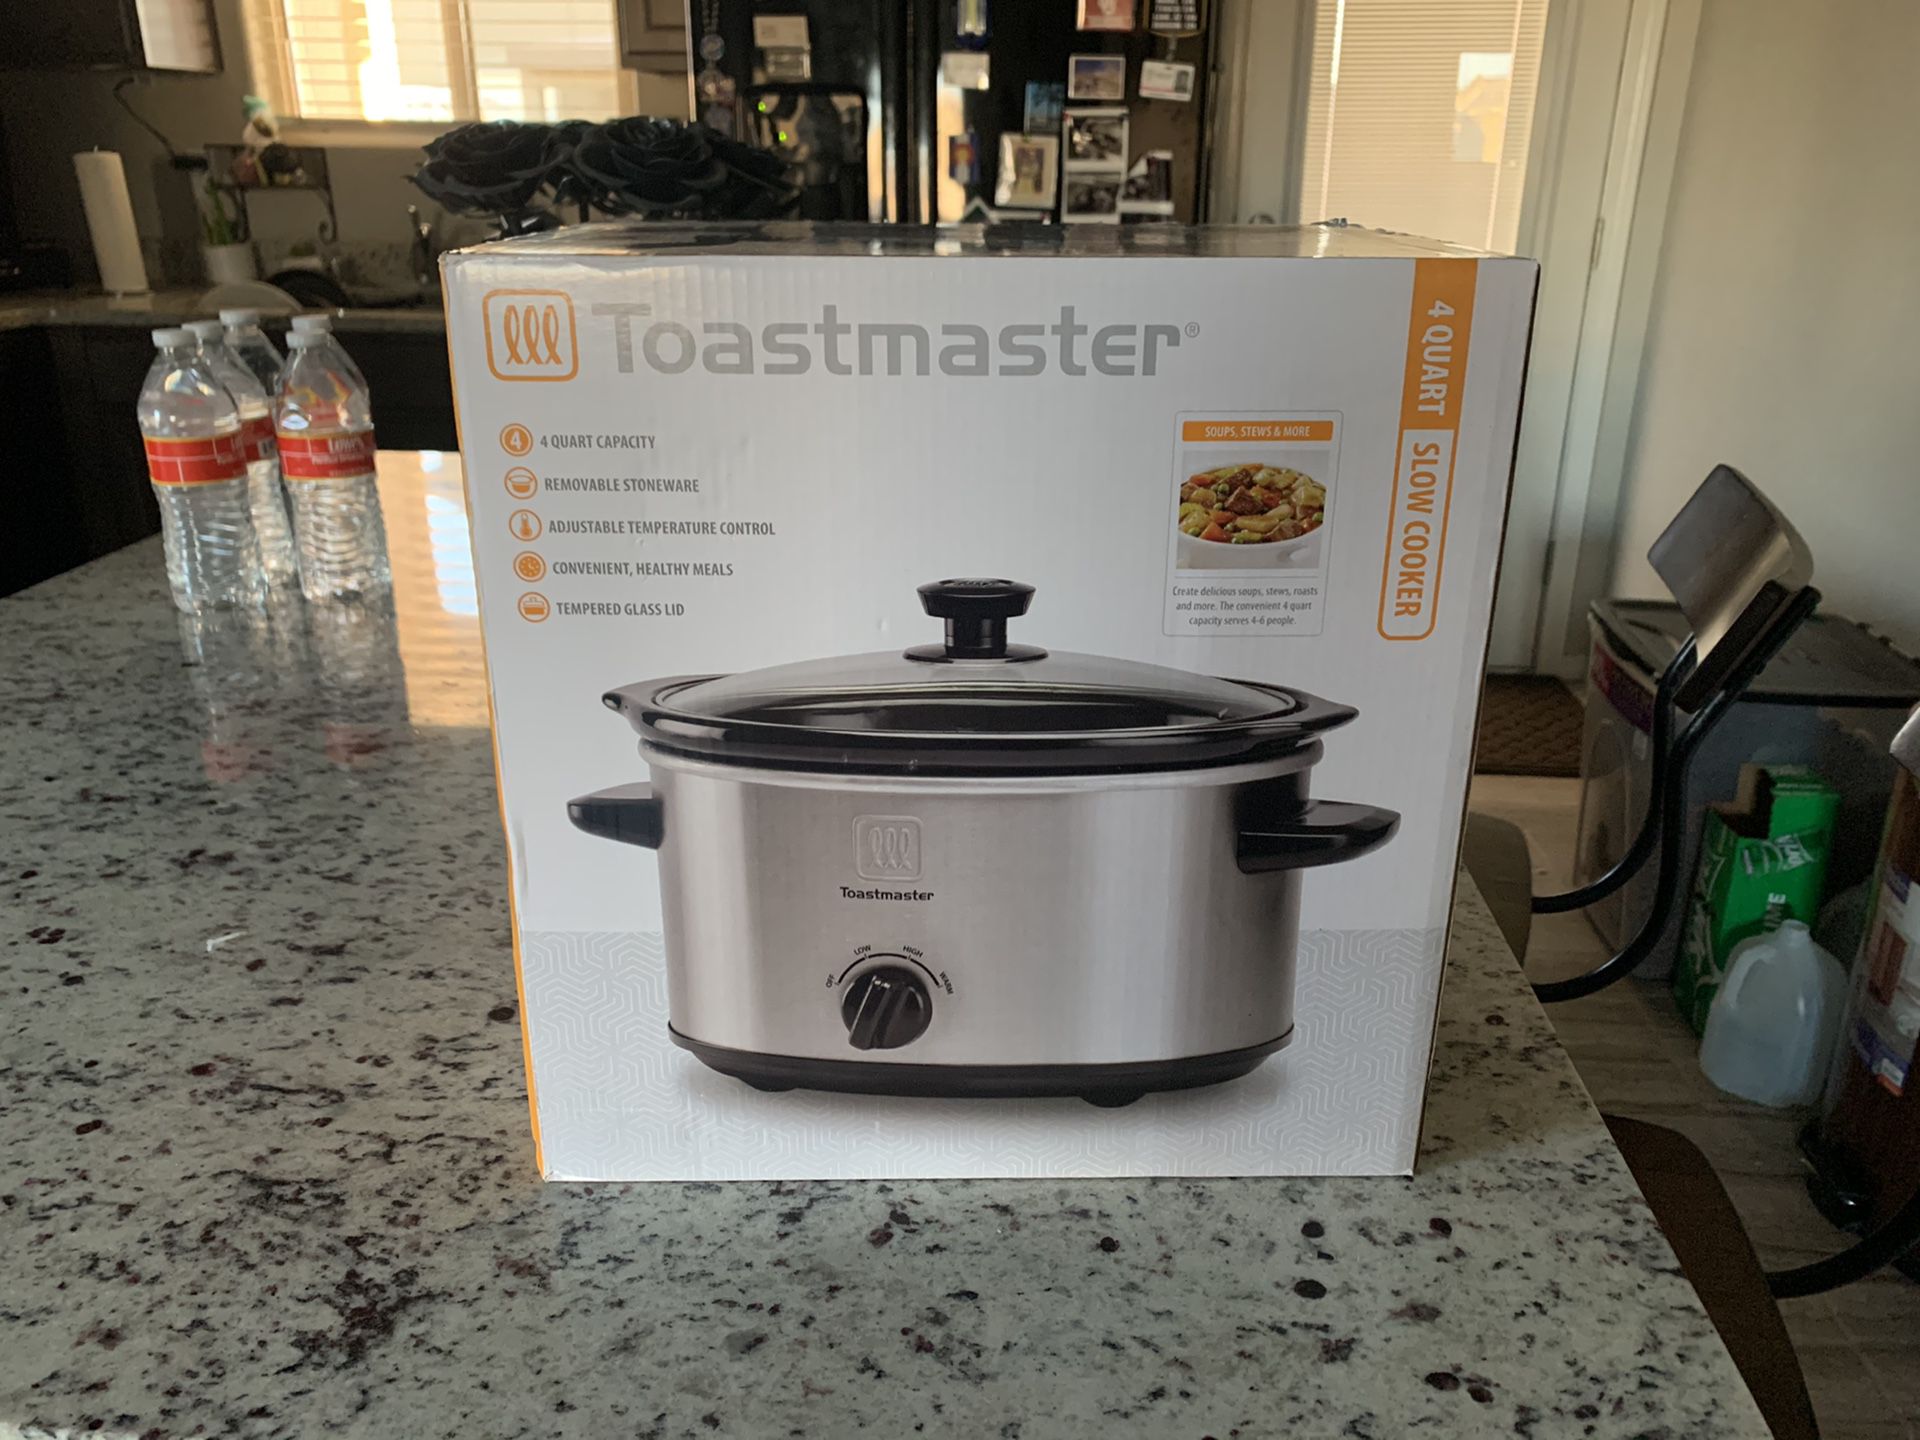 Toastmaster slow cooker